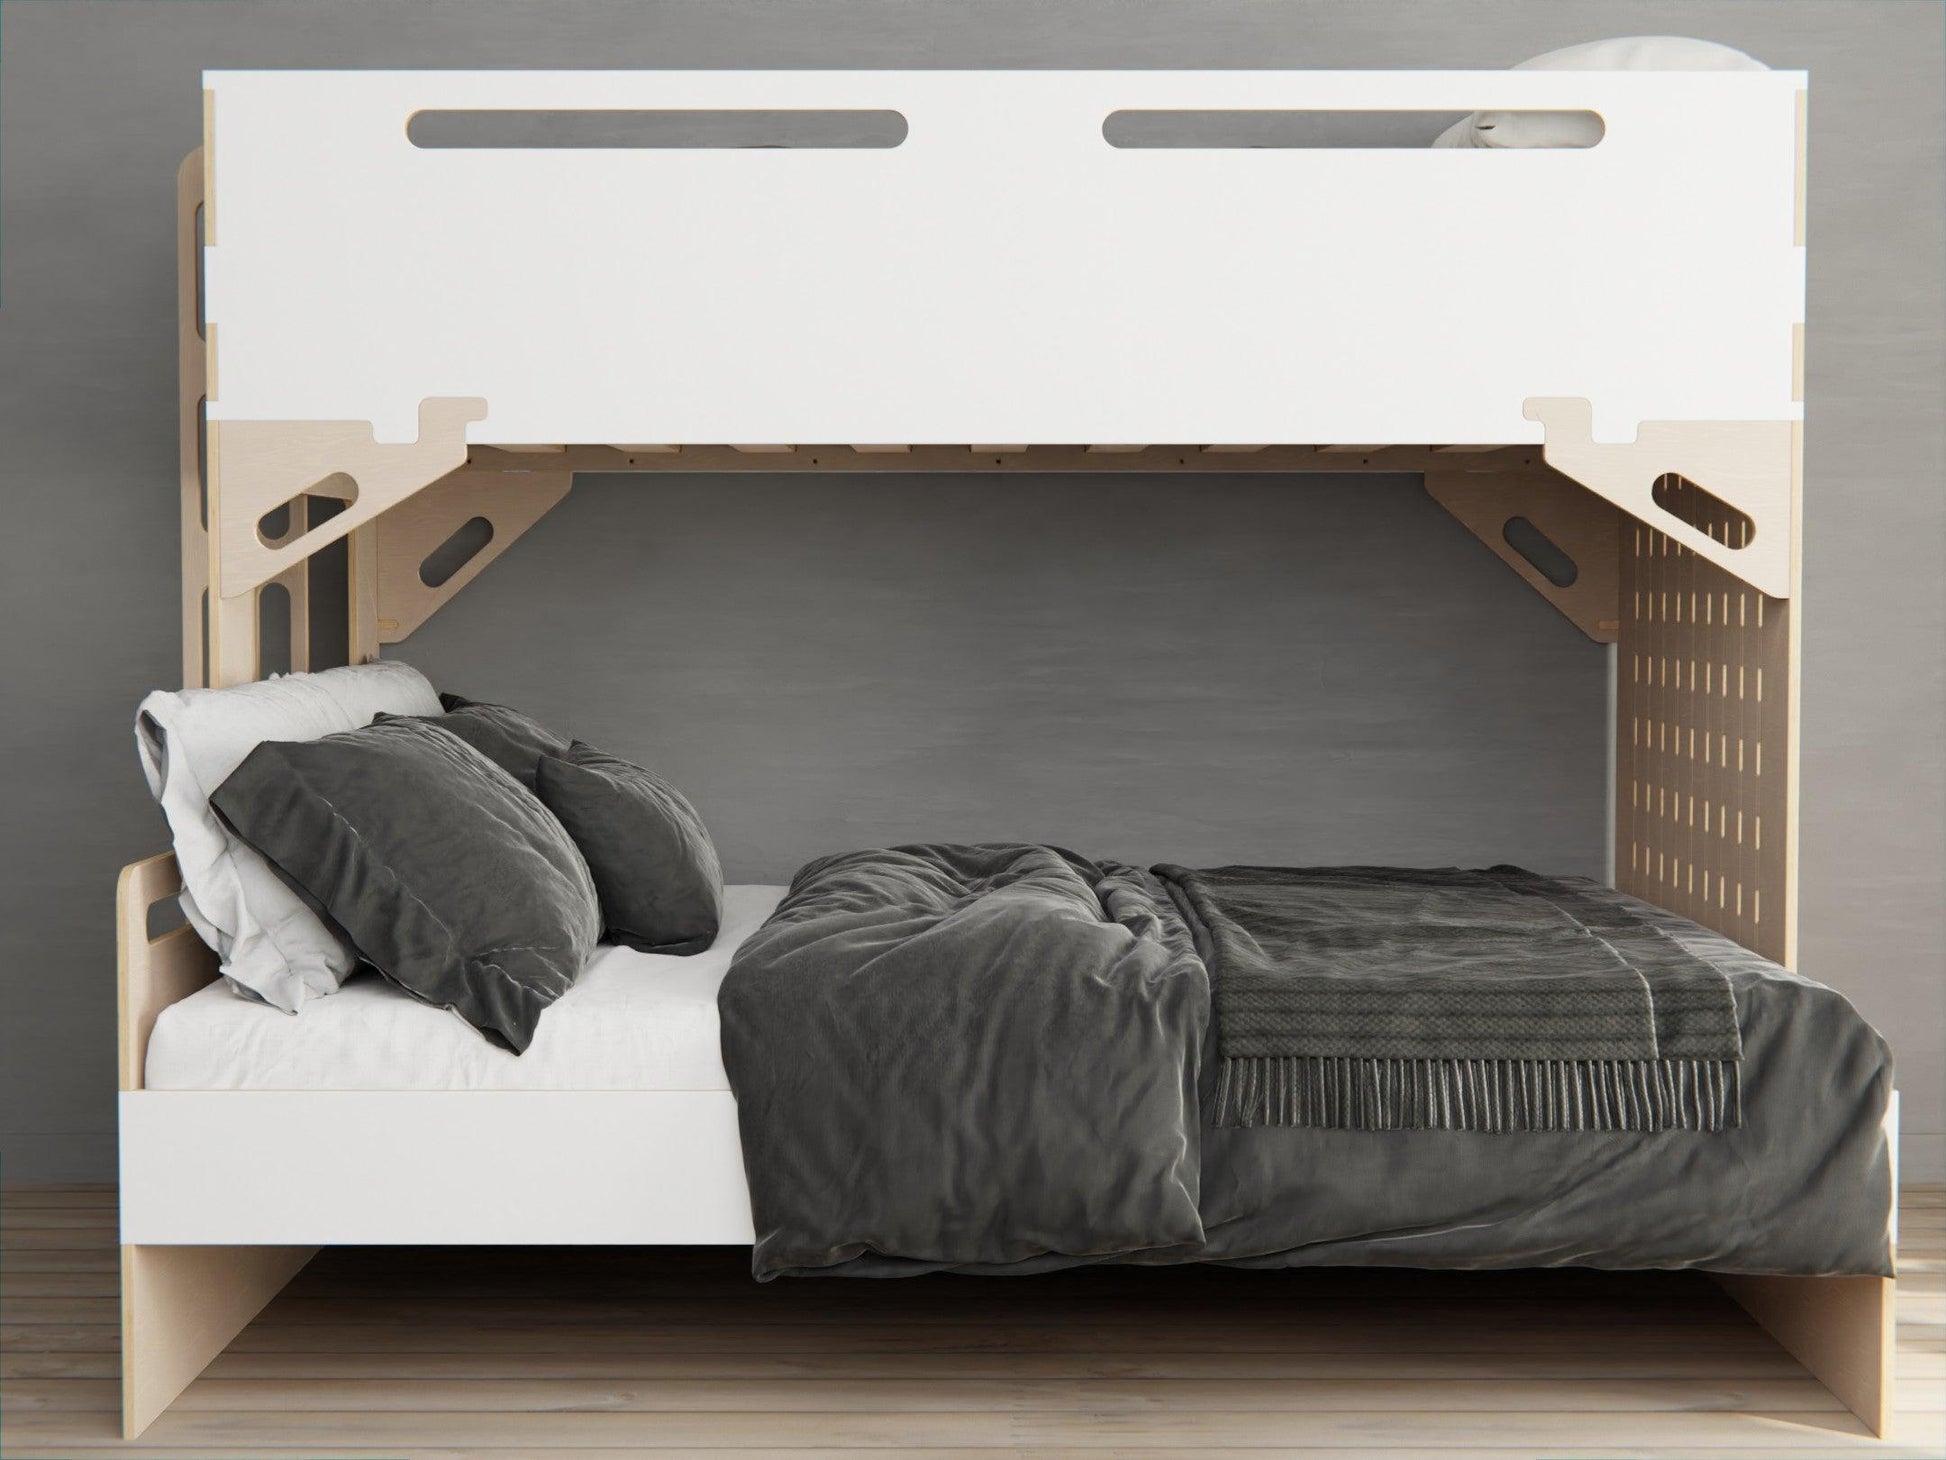 Unleash the potential of your room with our triple bunk beds. Made from durable white plywood for lasting quality.